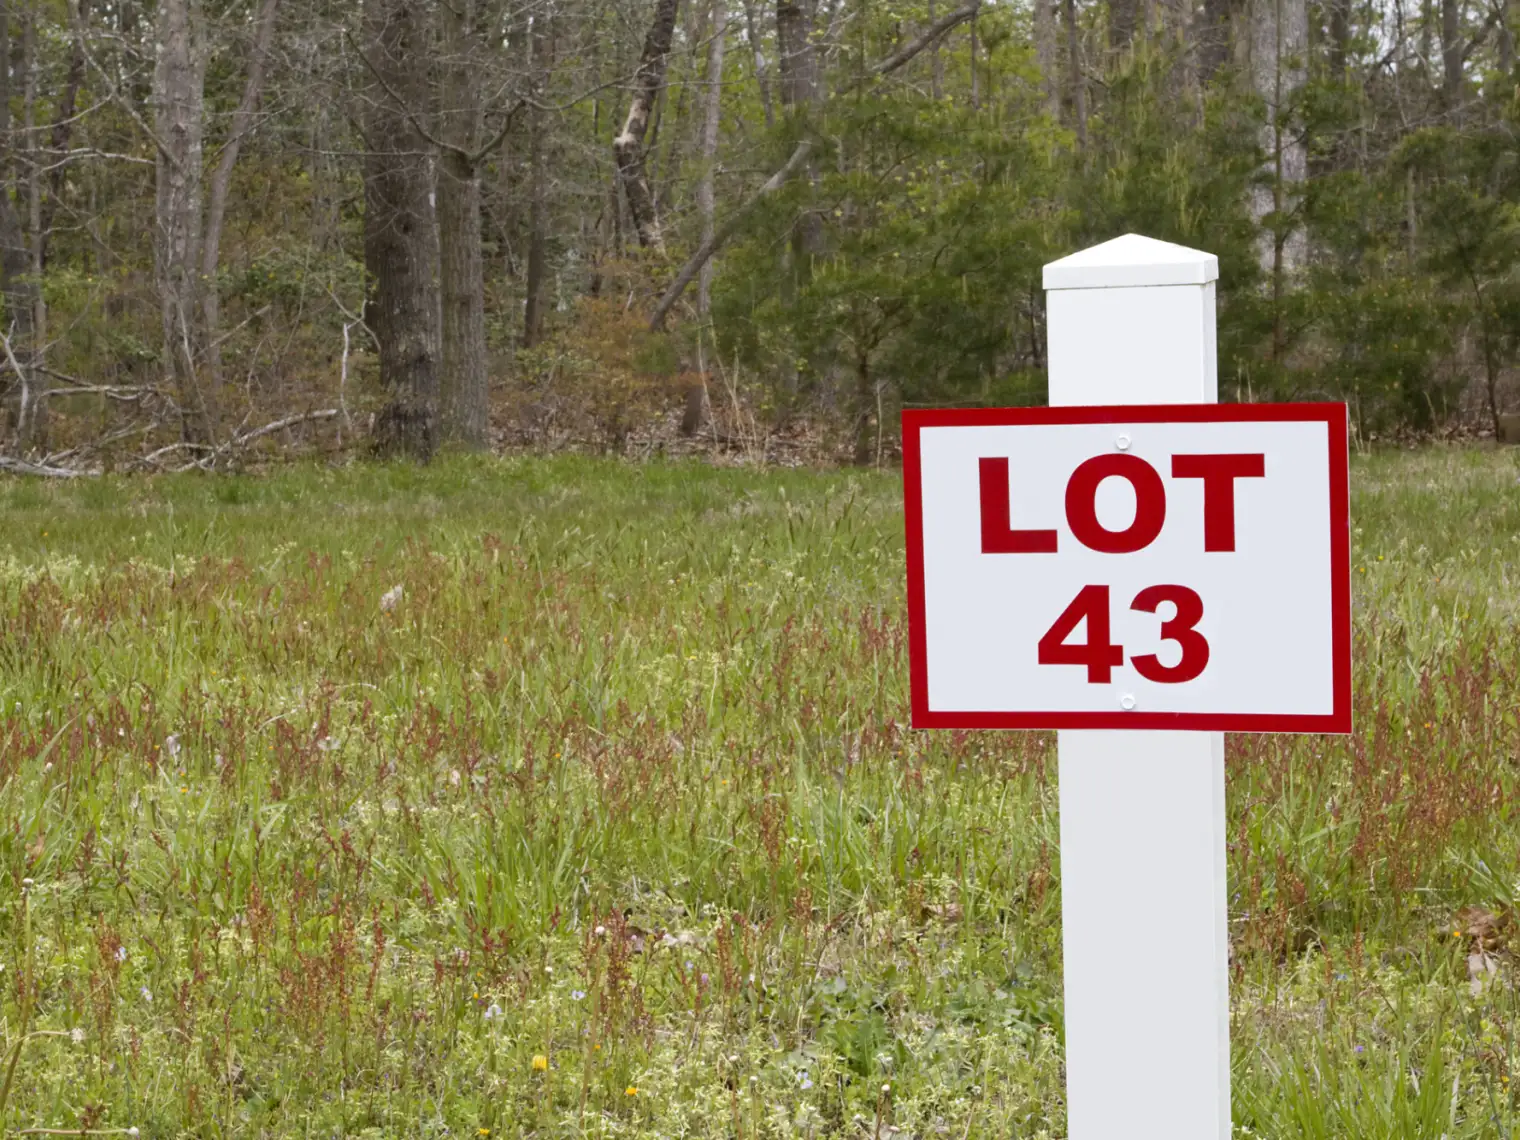 vacant lot number sign